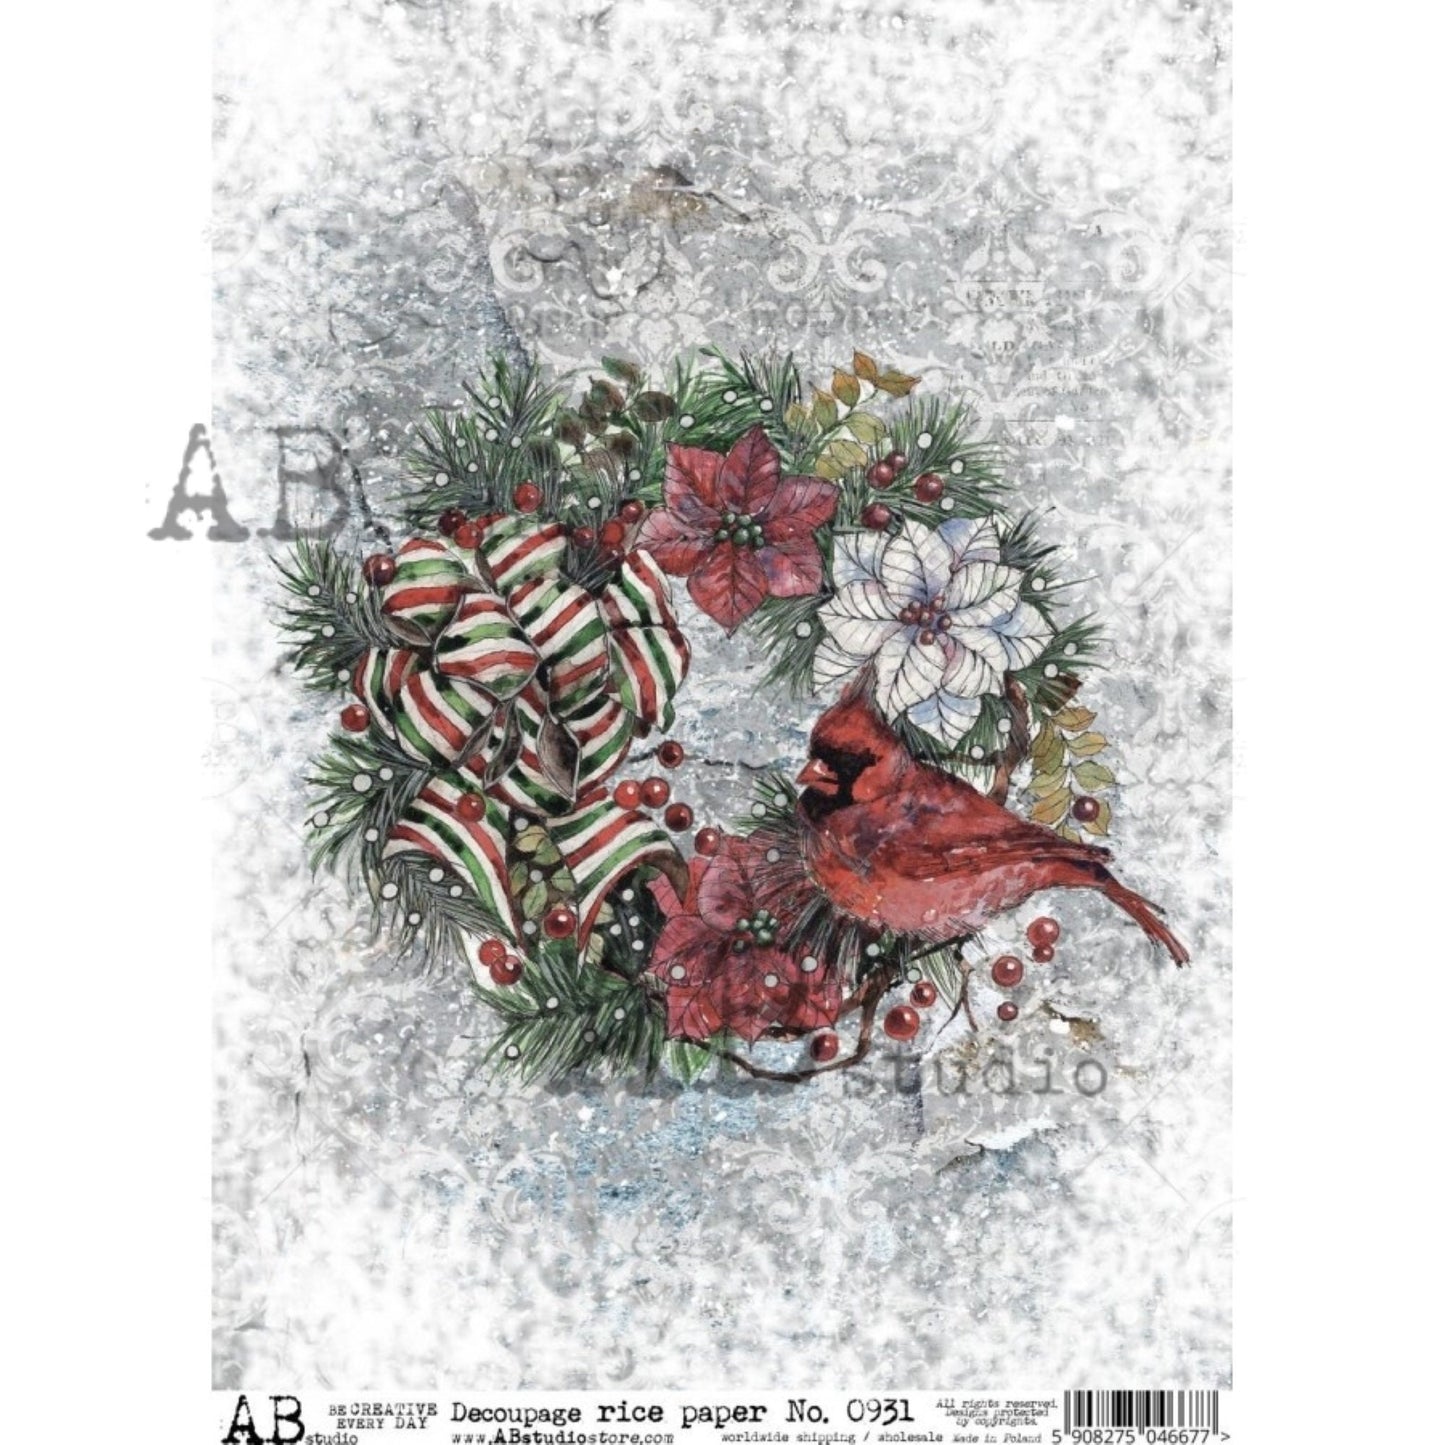 AB Studio Christmas Cardinal Wreath #0931 Size: A4 - 8.27 X 11.69 inches Rice Paper for Decoupage Imported from Poland